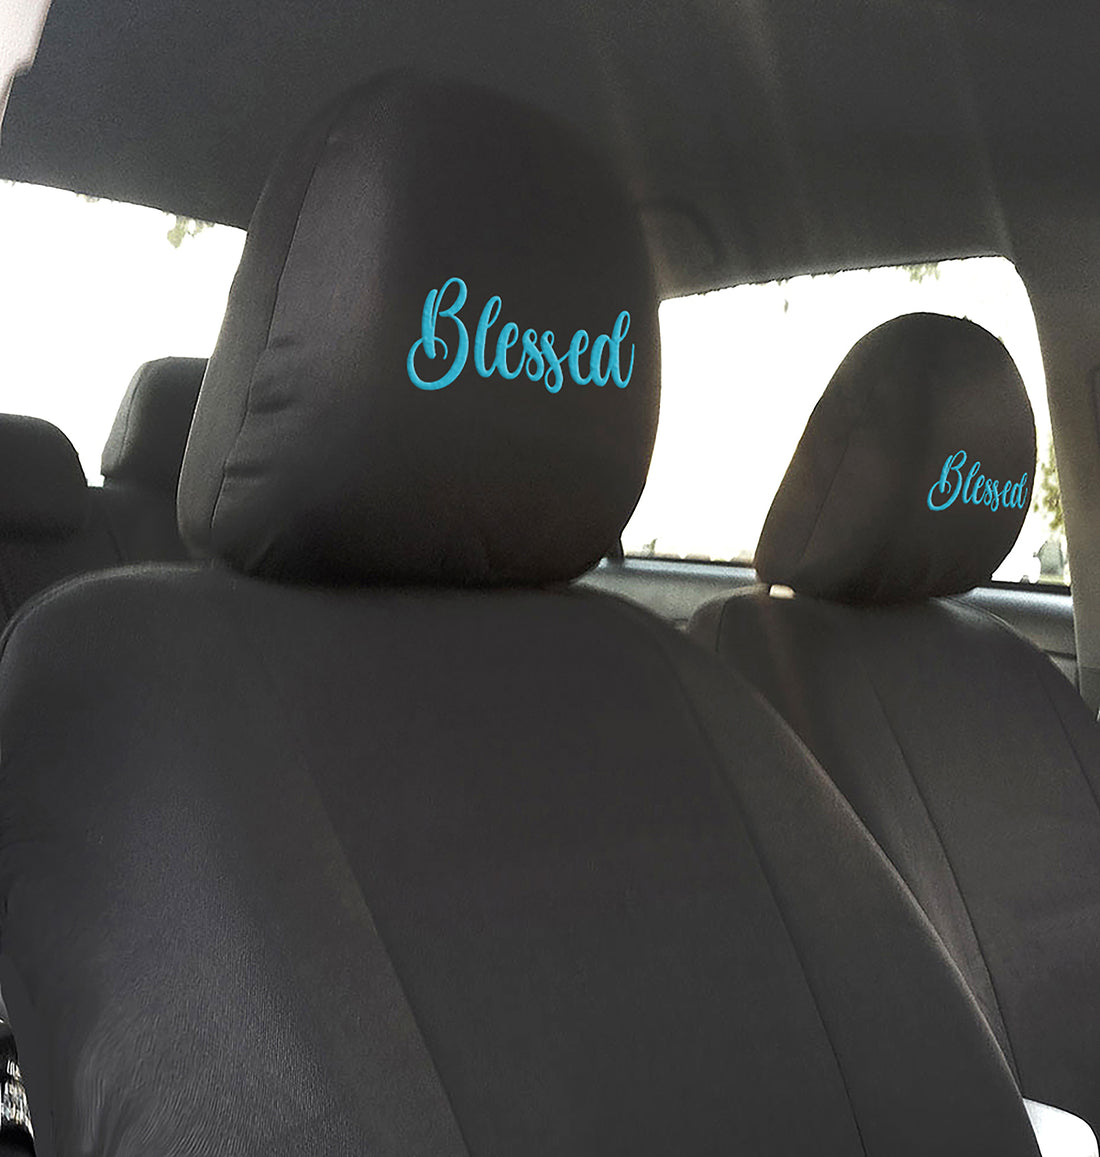 Add a personal accent to your car to create a new theme